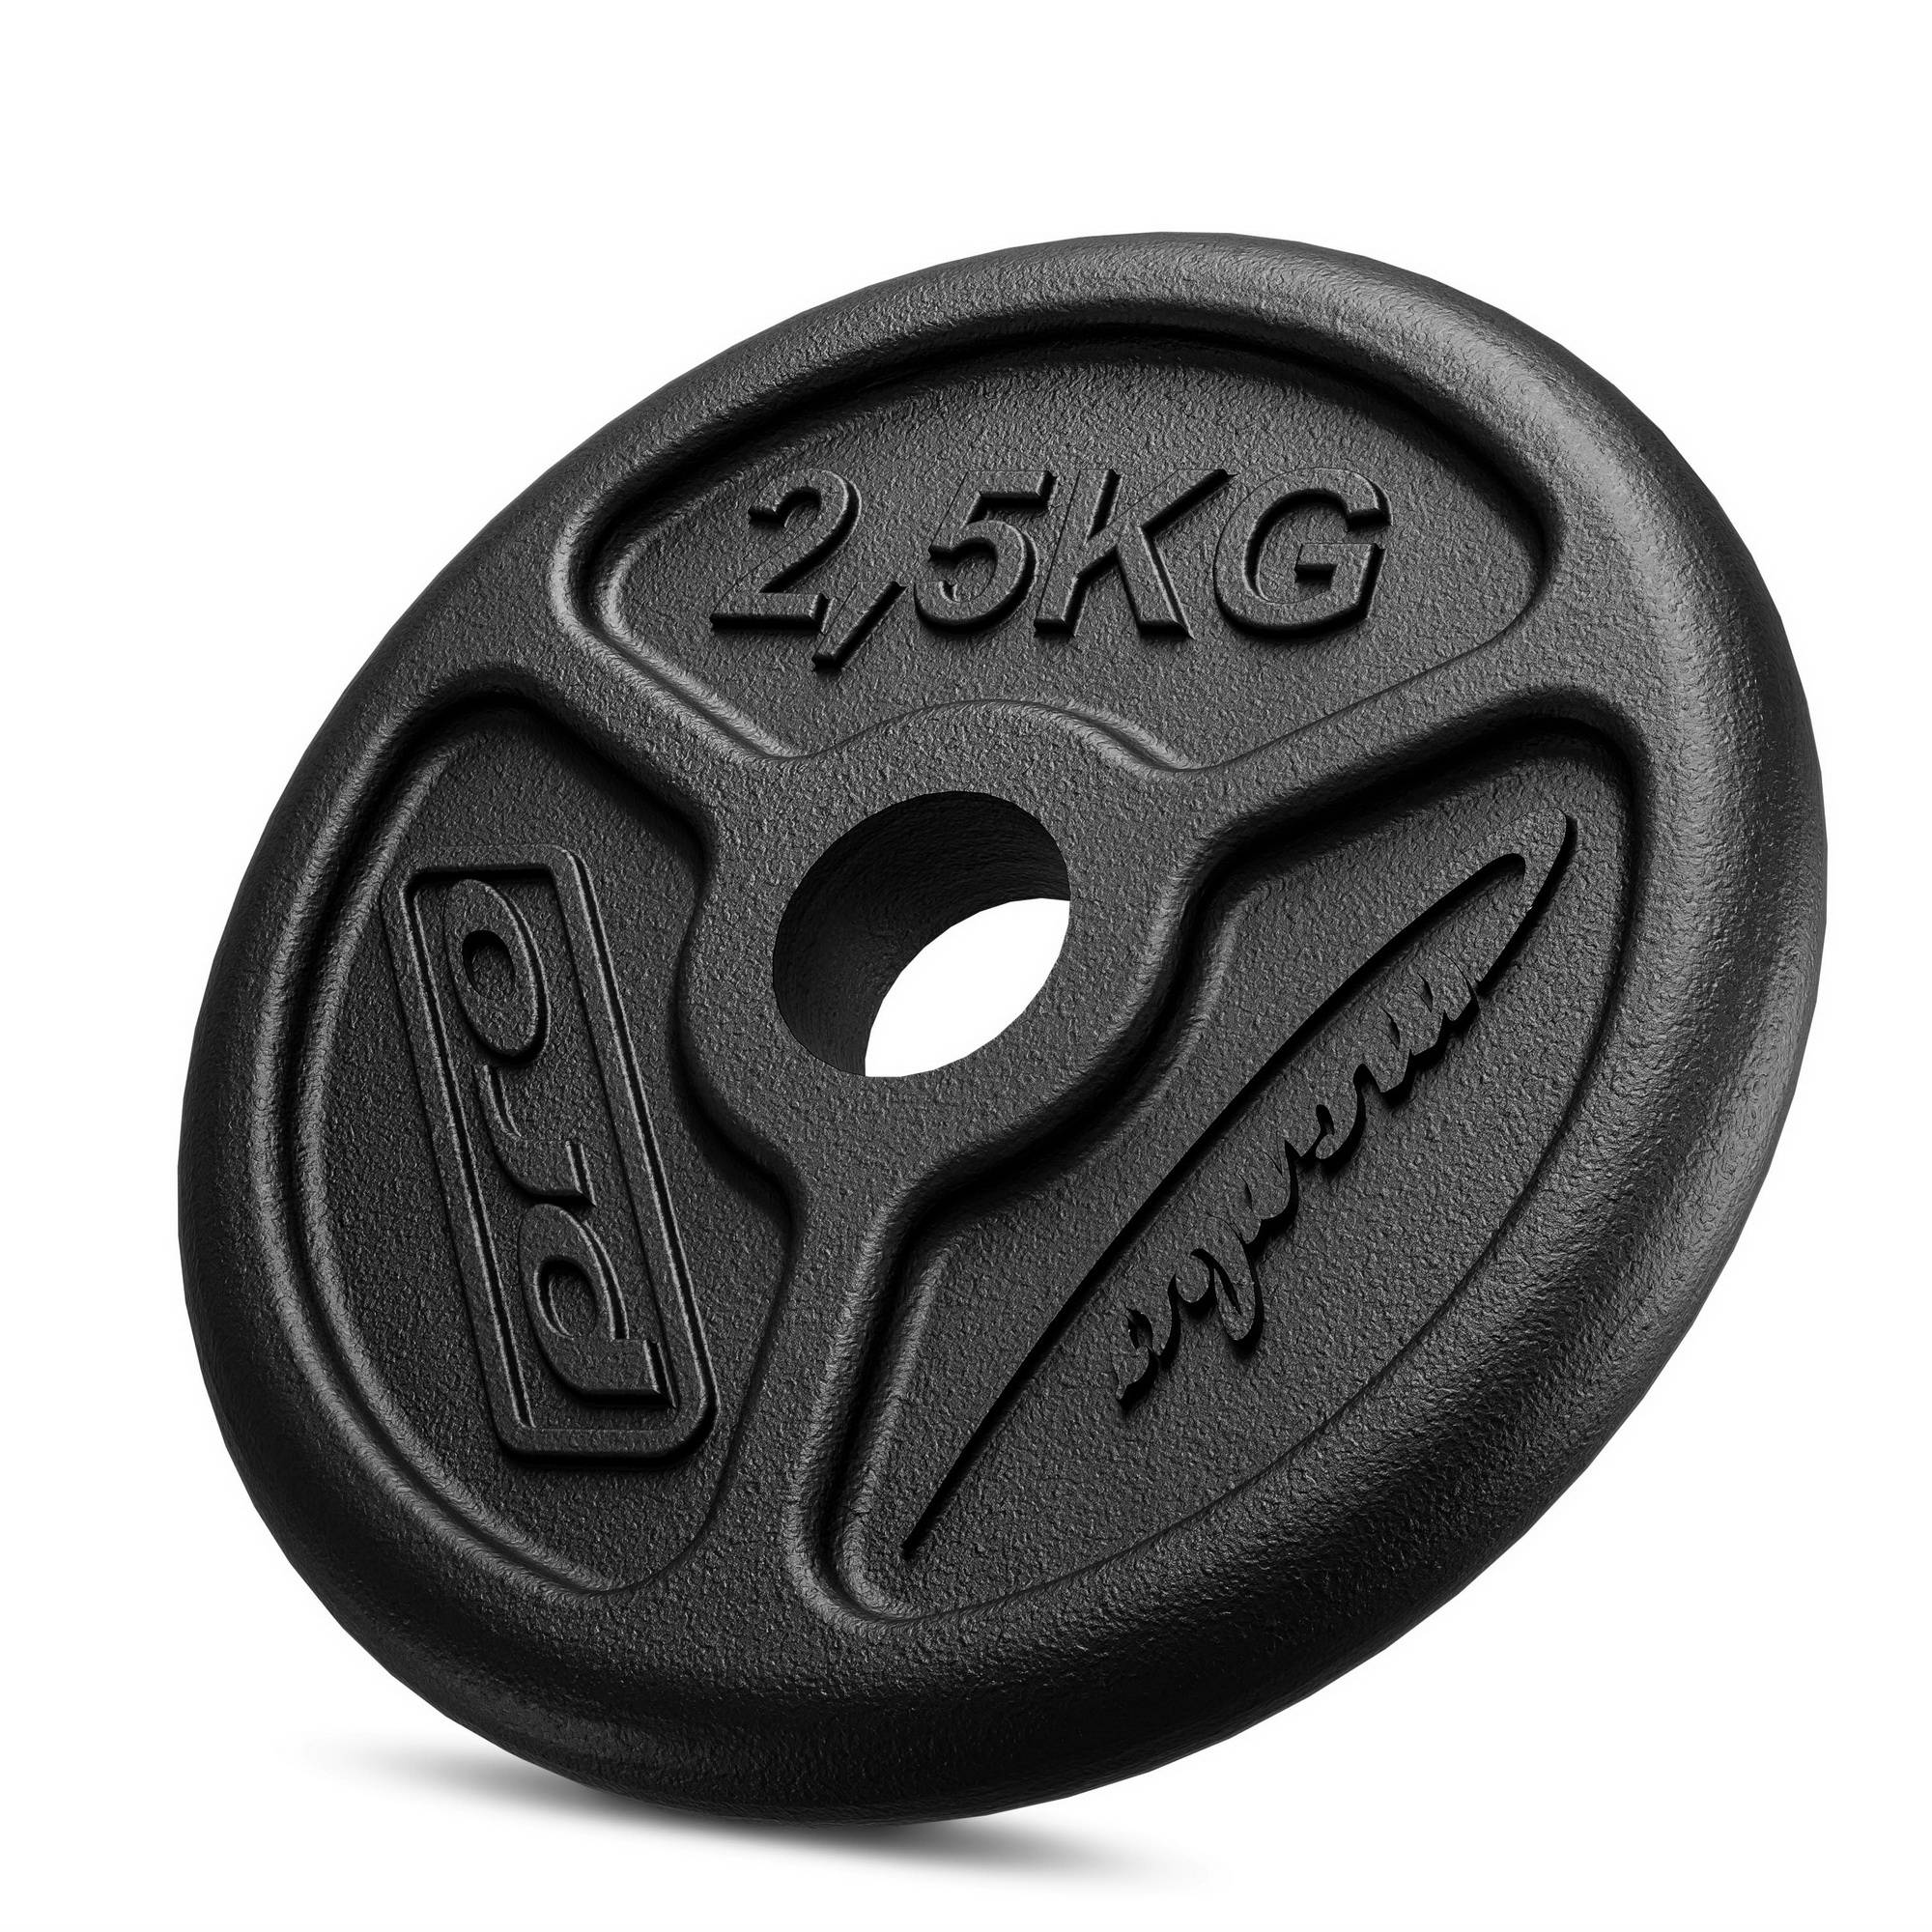 Standard iron discs Weight and 2023 Weight Bars Week 2,5 mm - 2.5 Marbo ø31 \\ plates 2023 \\ MW-O2,5-slim Standard plates Plates Week | kg kg slim with bore Sport weight Black Cyber